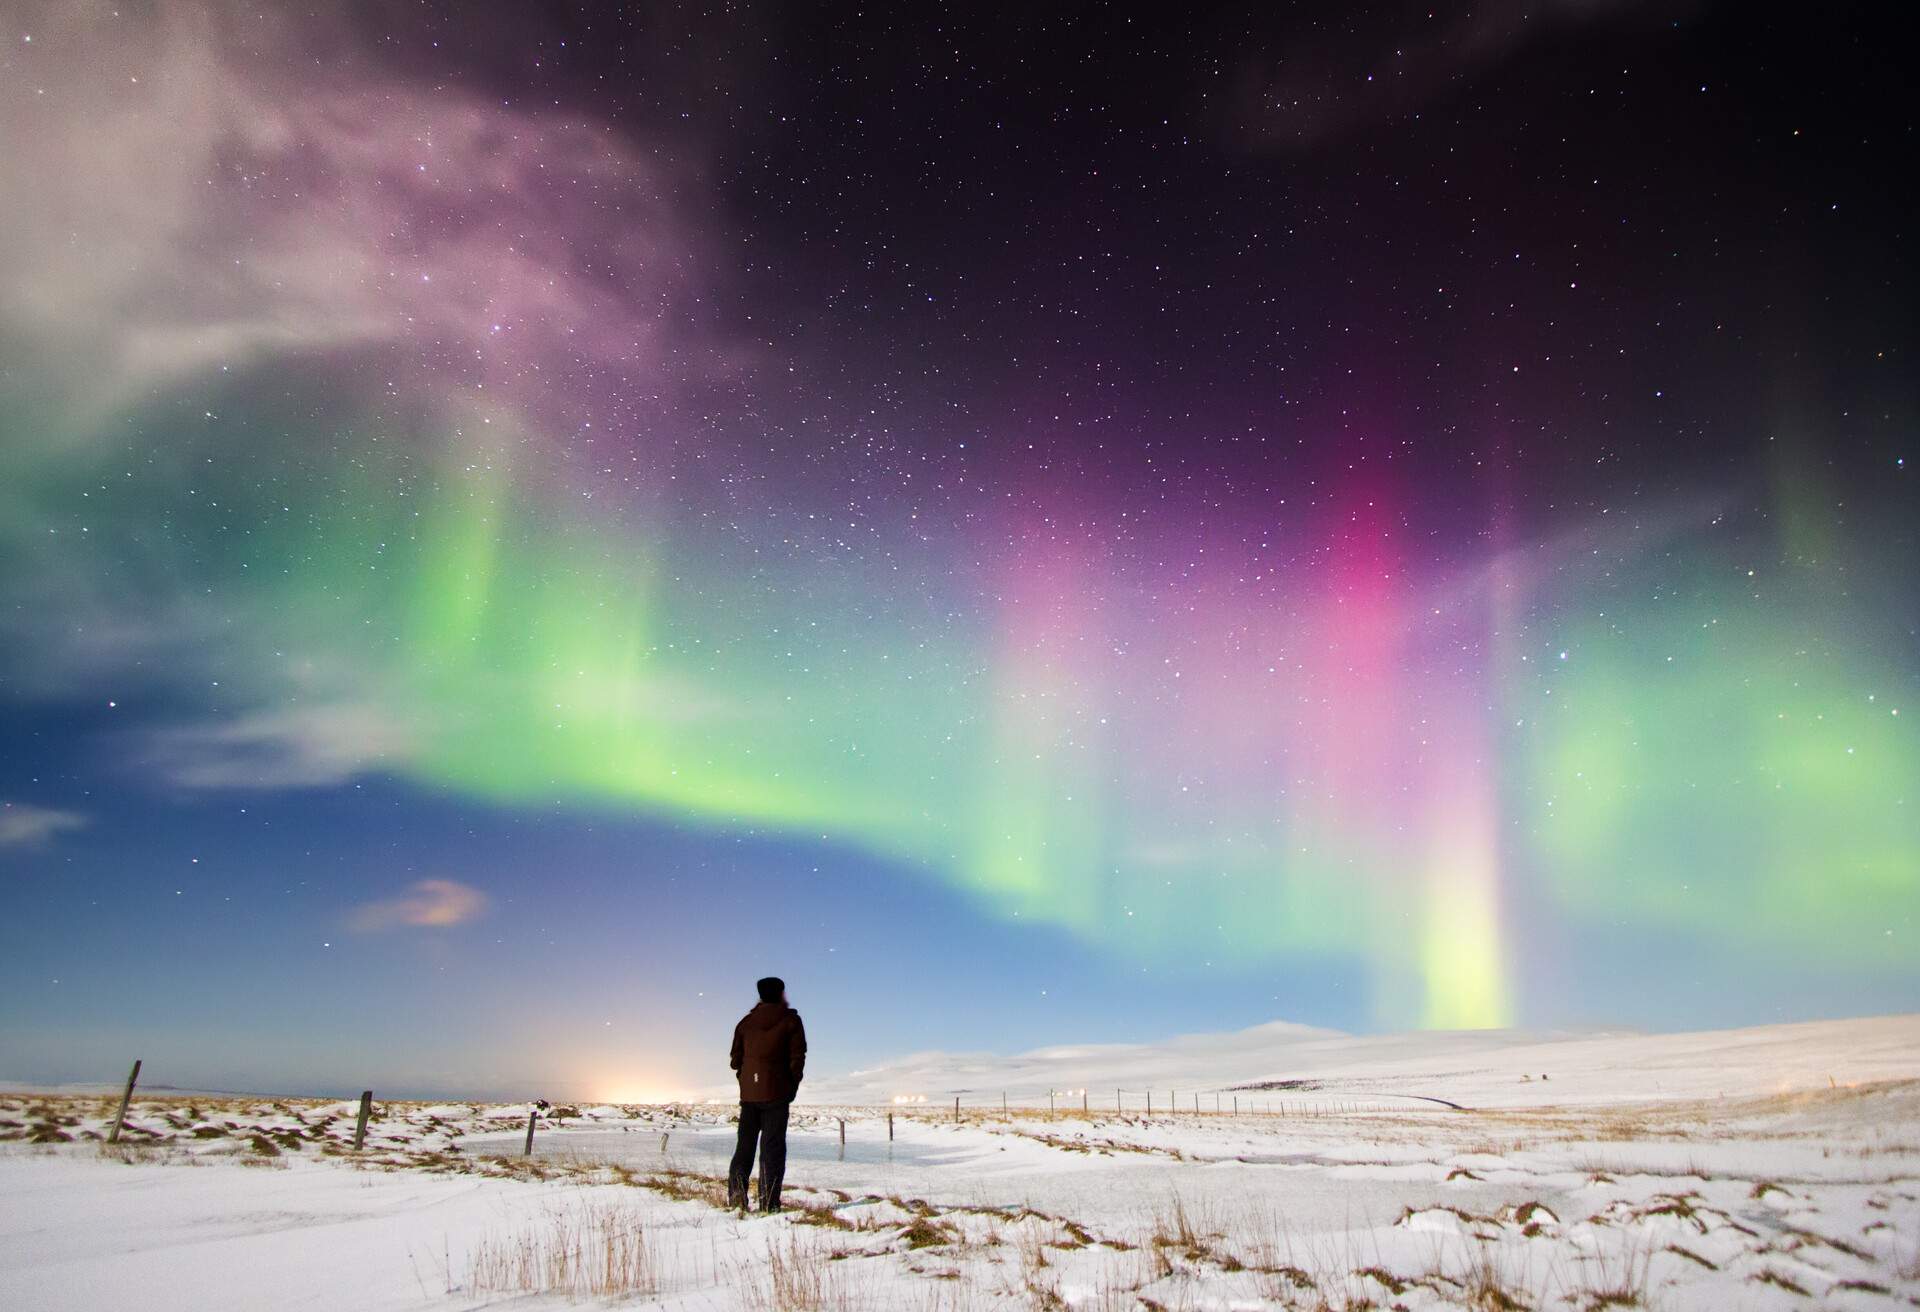 A man standing on a snowfield gazing at the northern lights in a night sky filled with stars.